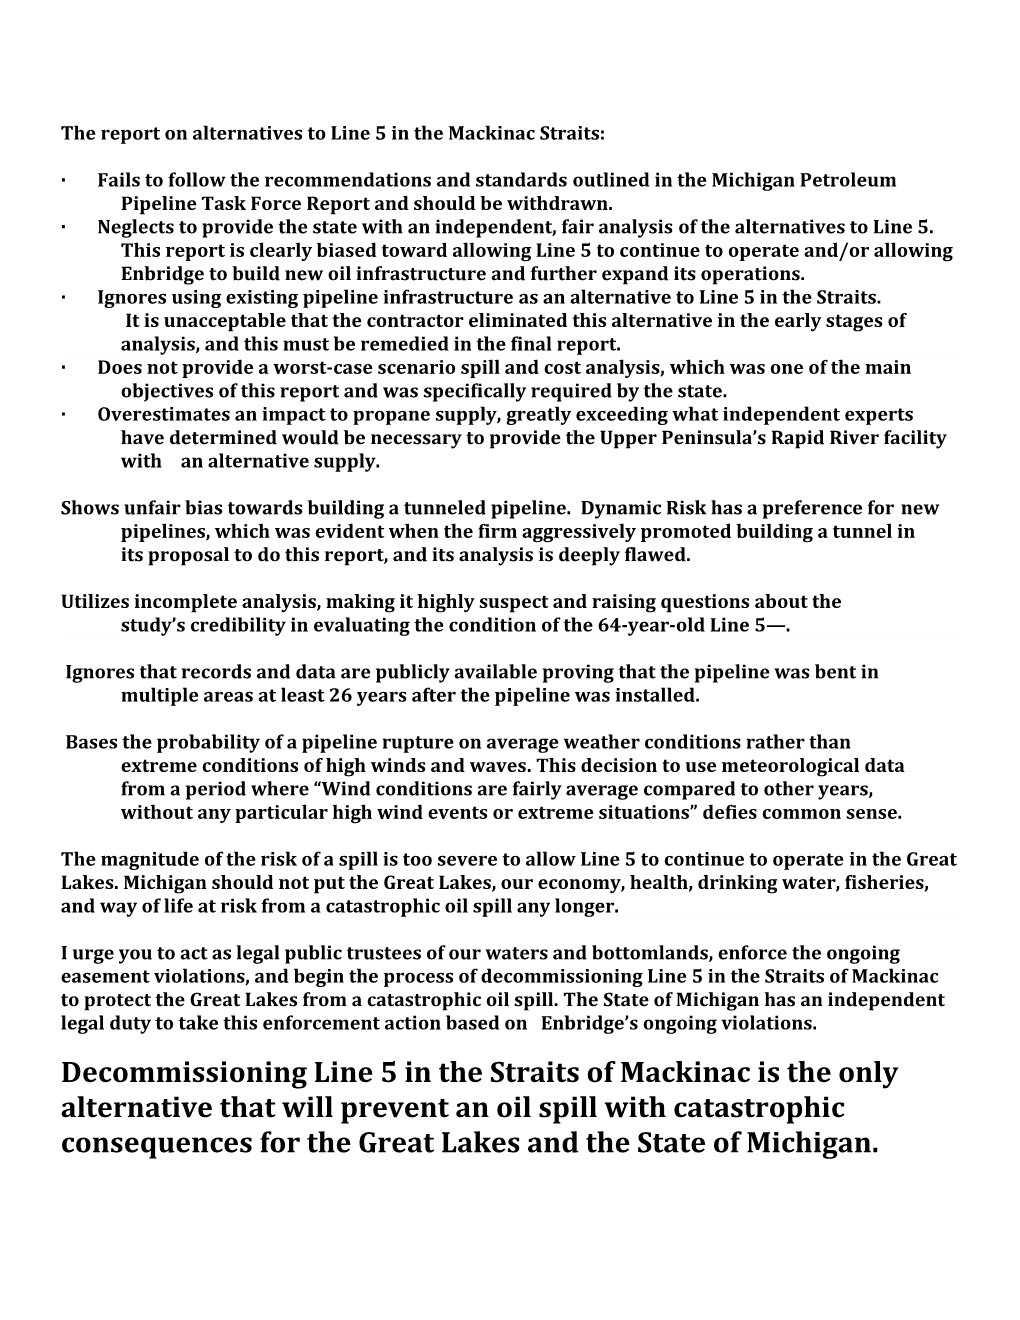 The Report on Alternatives to Line 5 in the Mackinac Straits